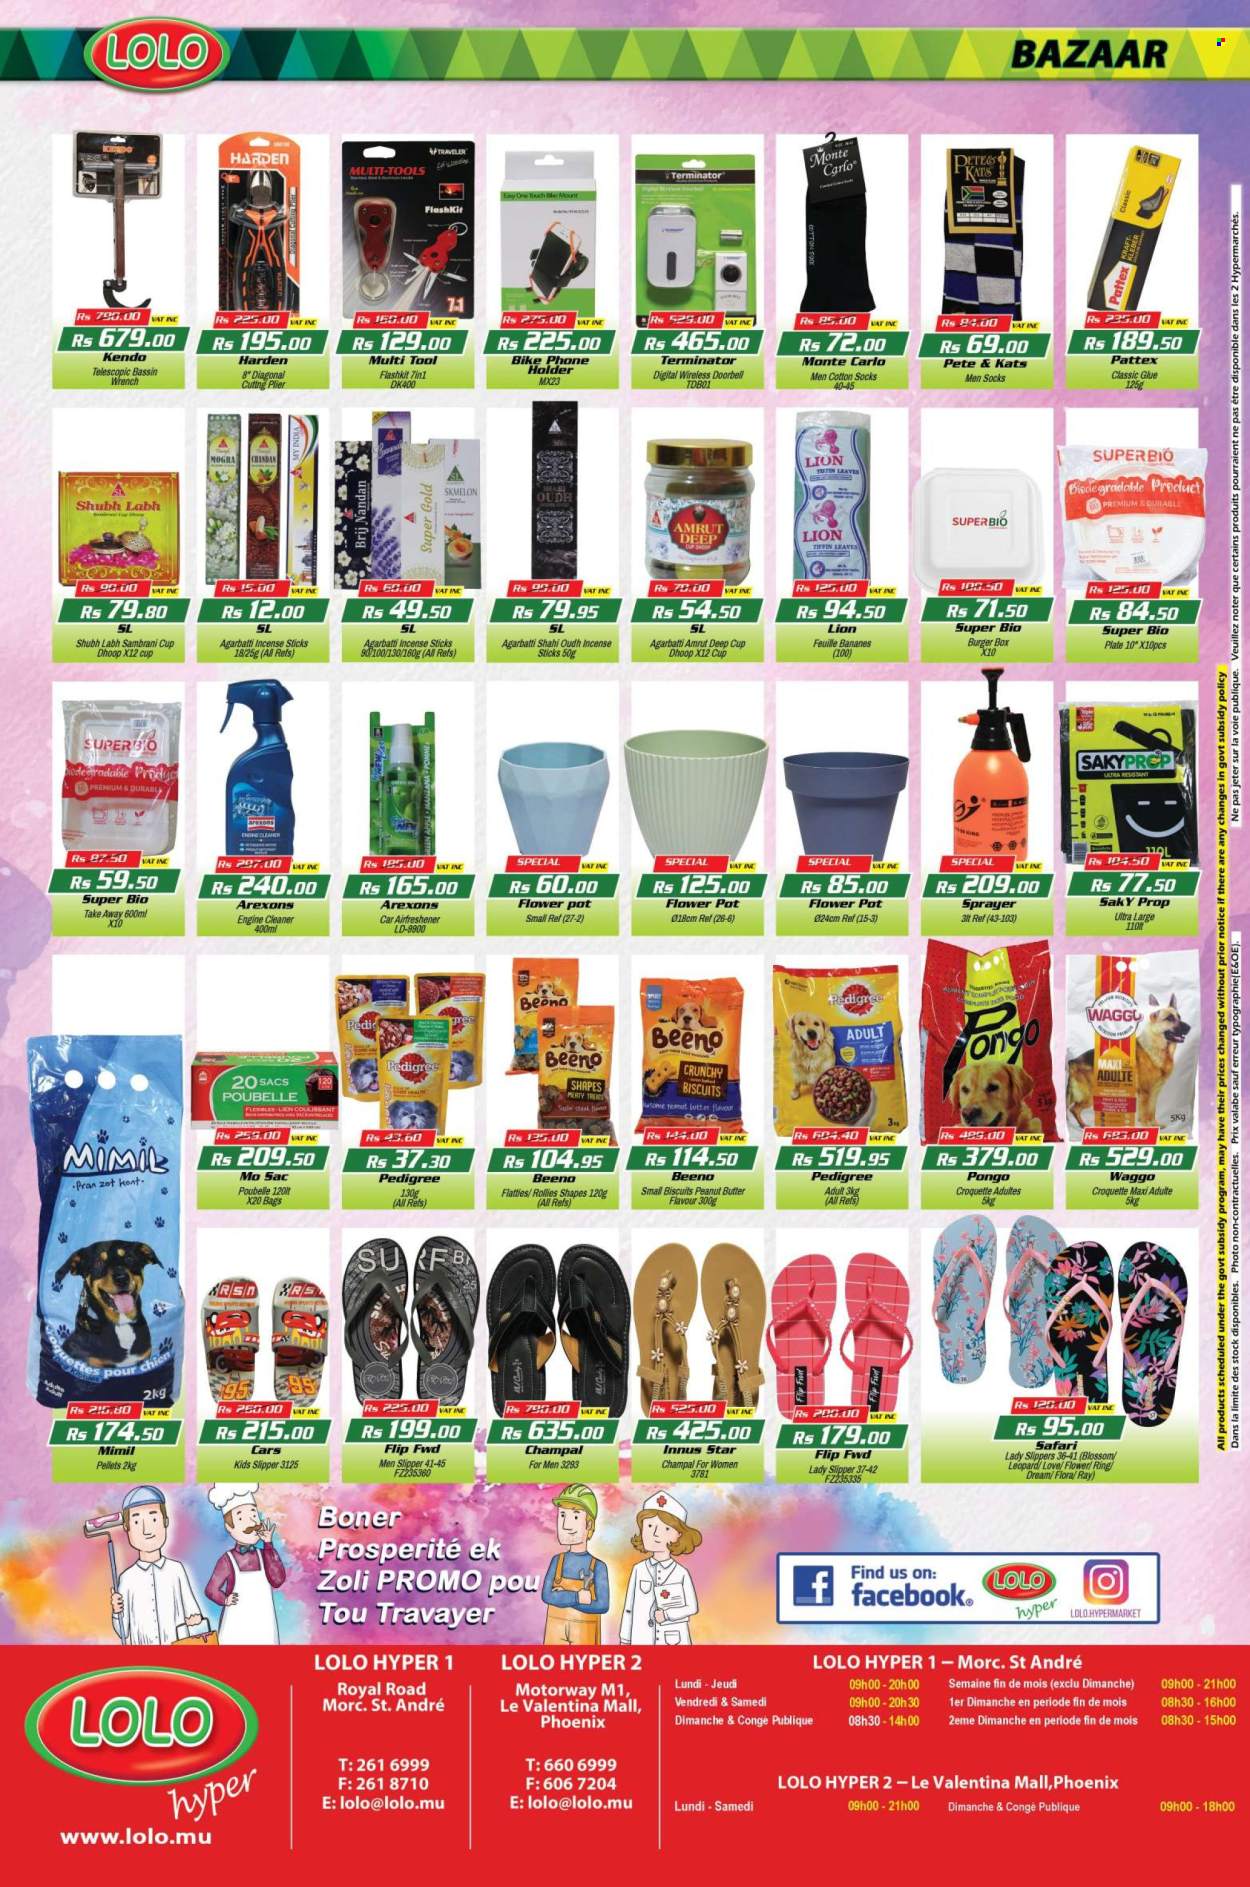 thumbnail - LOLO Hyper Catalogue - 27.04.2024 - 15.05.2024 - Sales products - hamburger, Flora, Blossom, biscuit, peanut butter, wine, steak, cleaner, bag, plate, pot, cup, meal box, glue, Pedigree, socks, cotton socks, cap, slippers, flower pot, sprayer. Page 24.